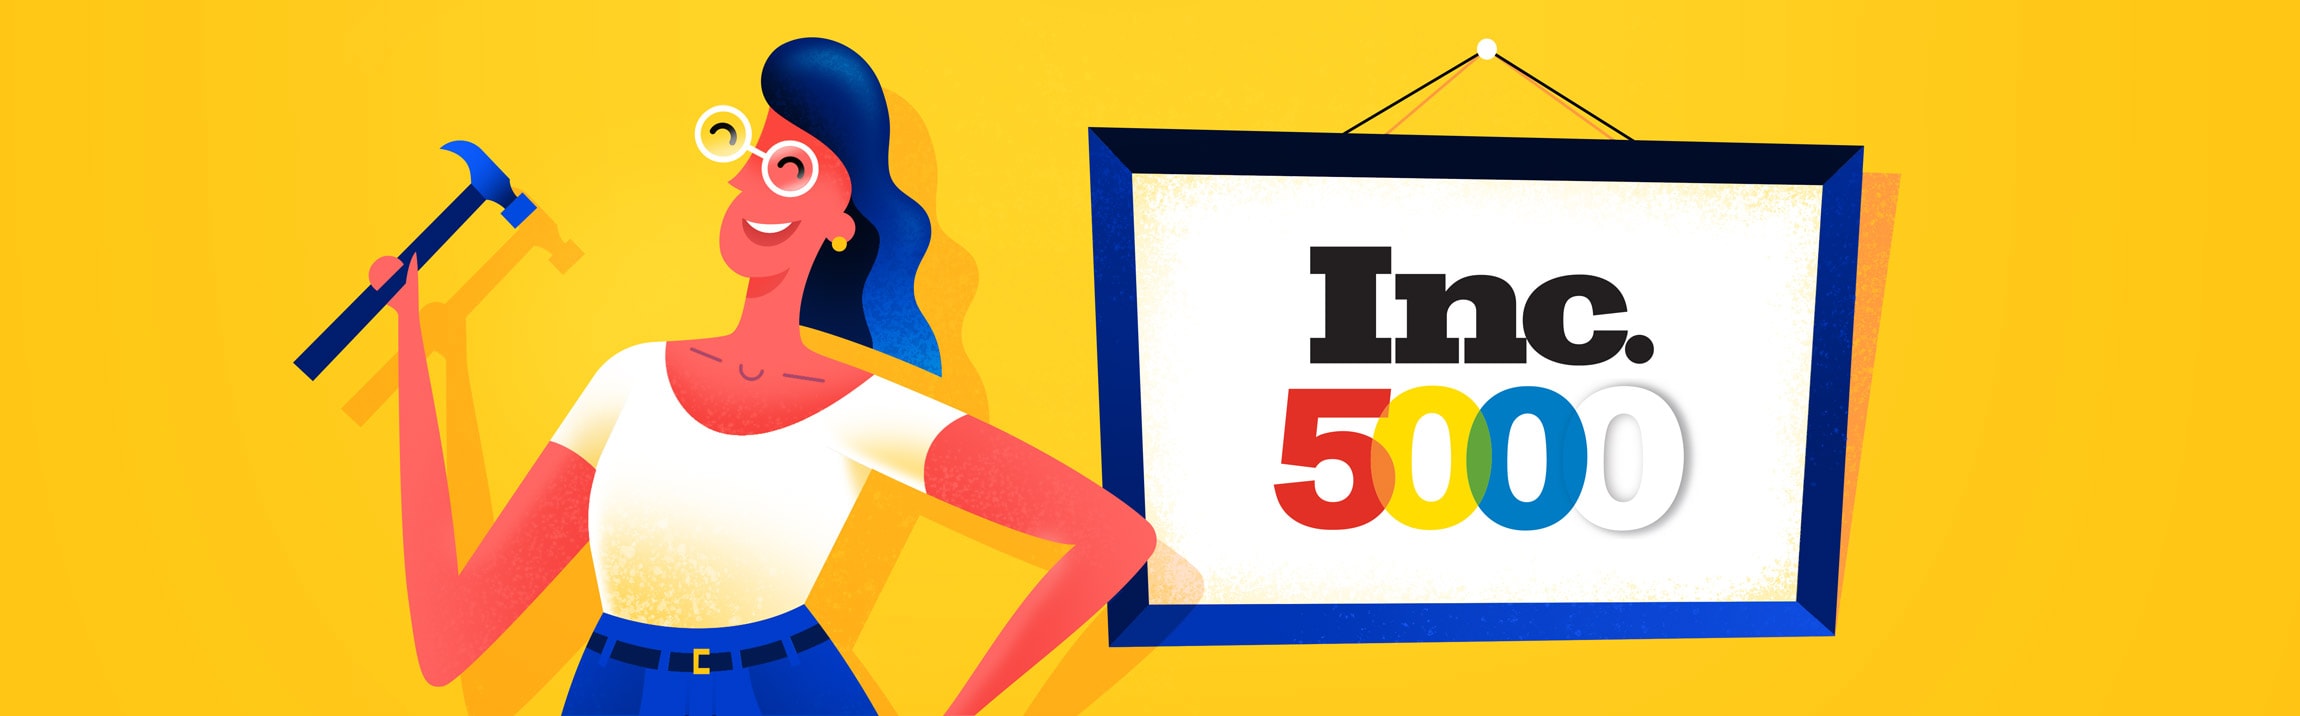 Health Union named to Inc. 5000 2019